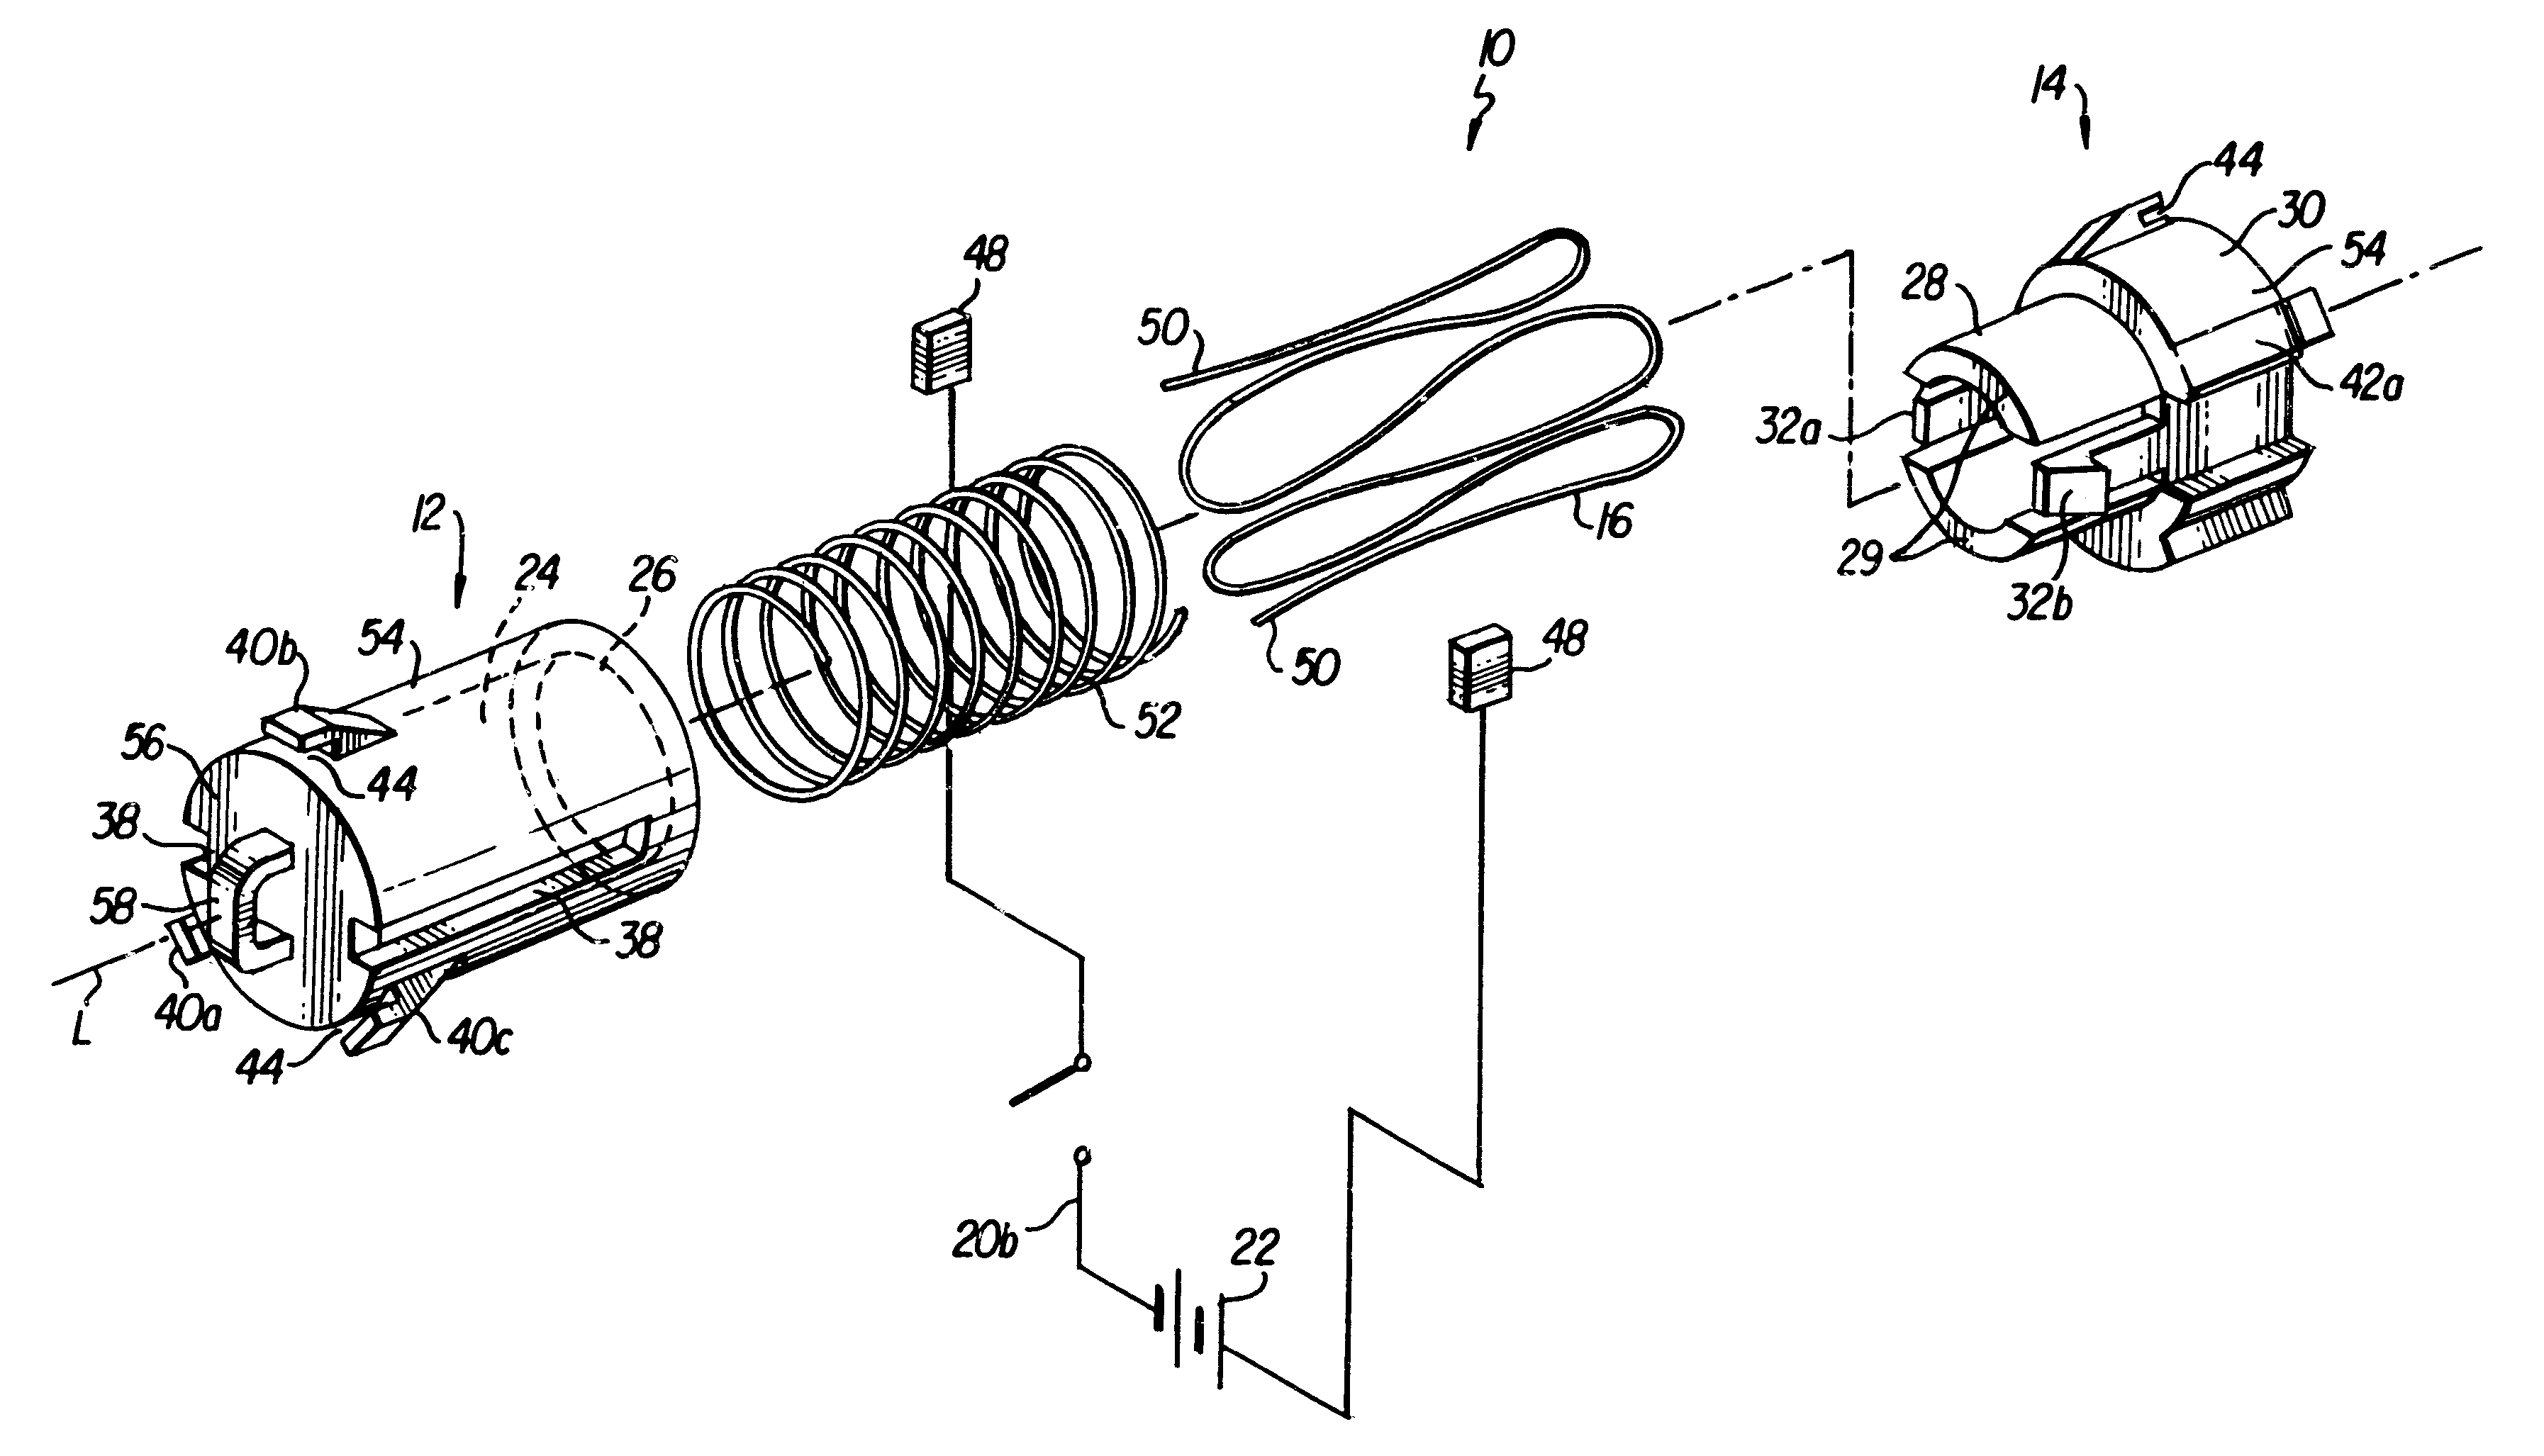 Shape memory alloy wire actuator